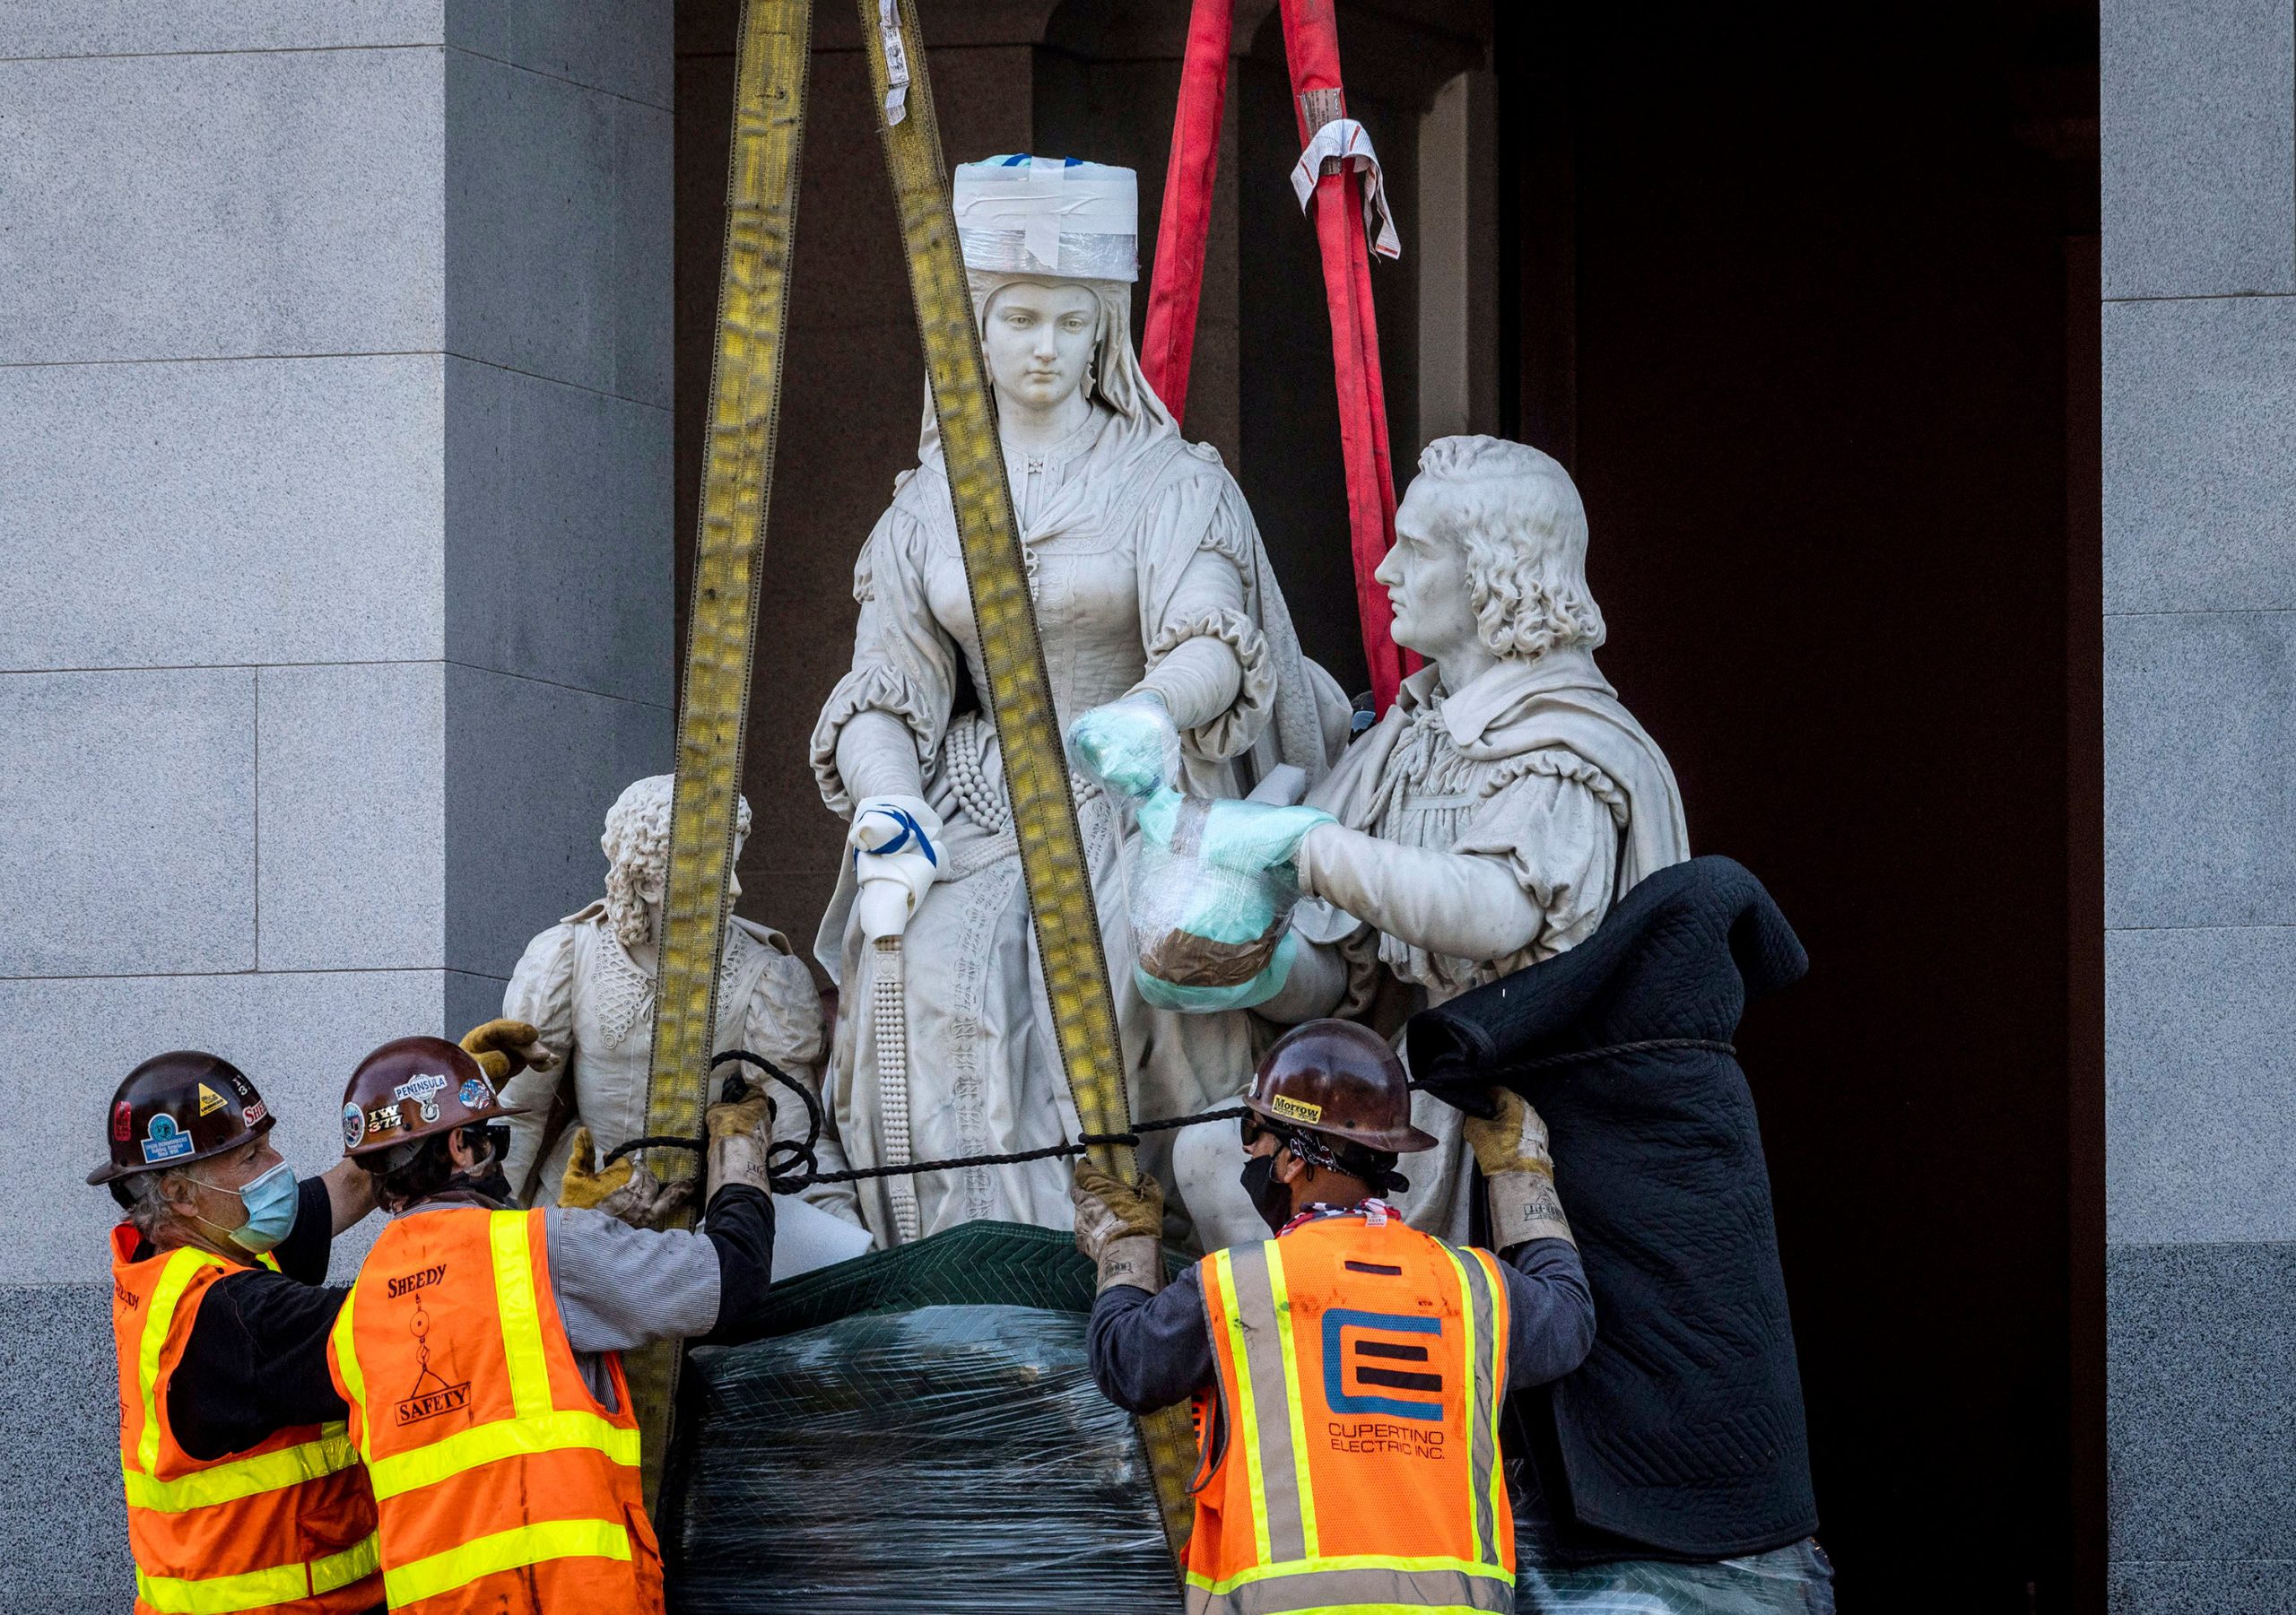 Christopher Columbus statues removed in Chicago following backlash